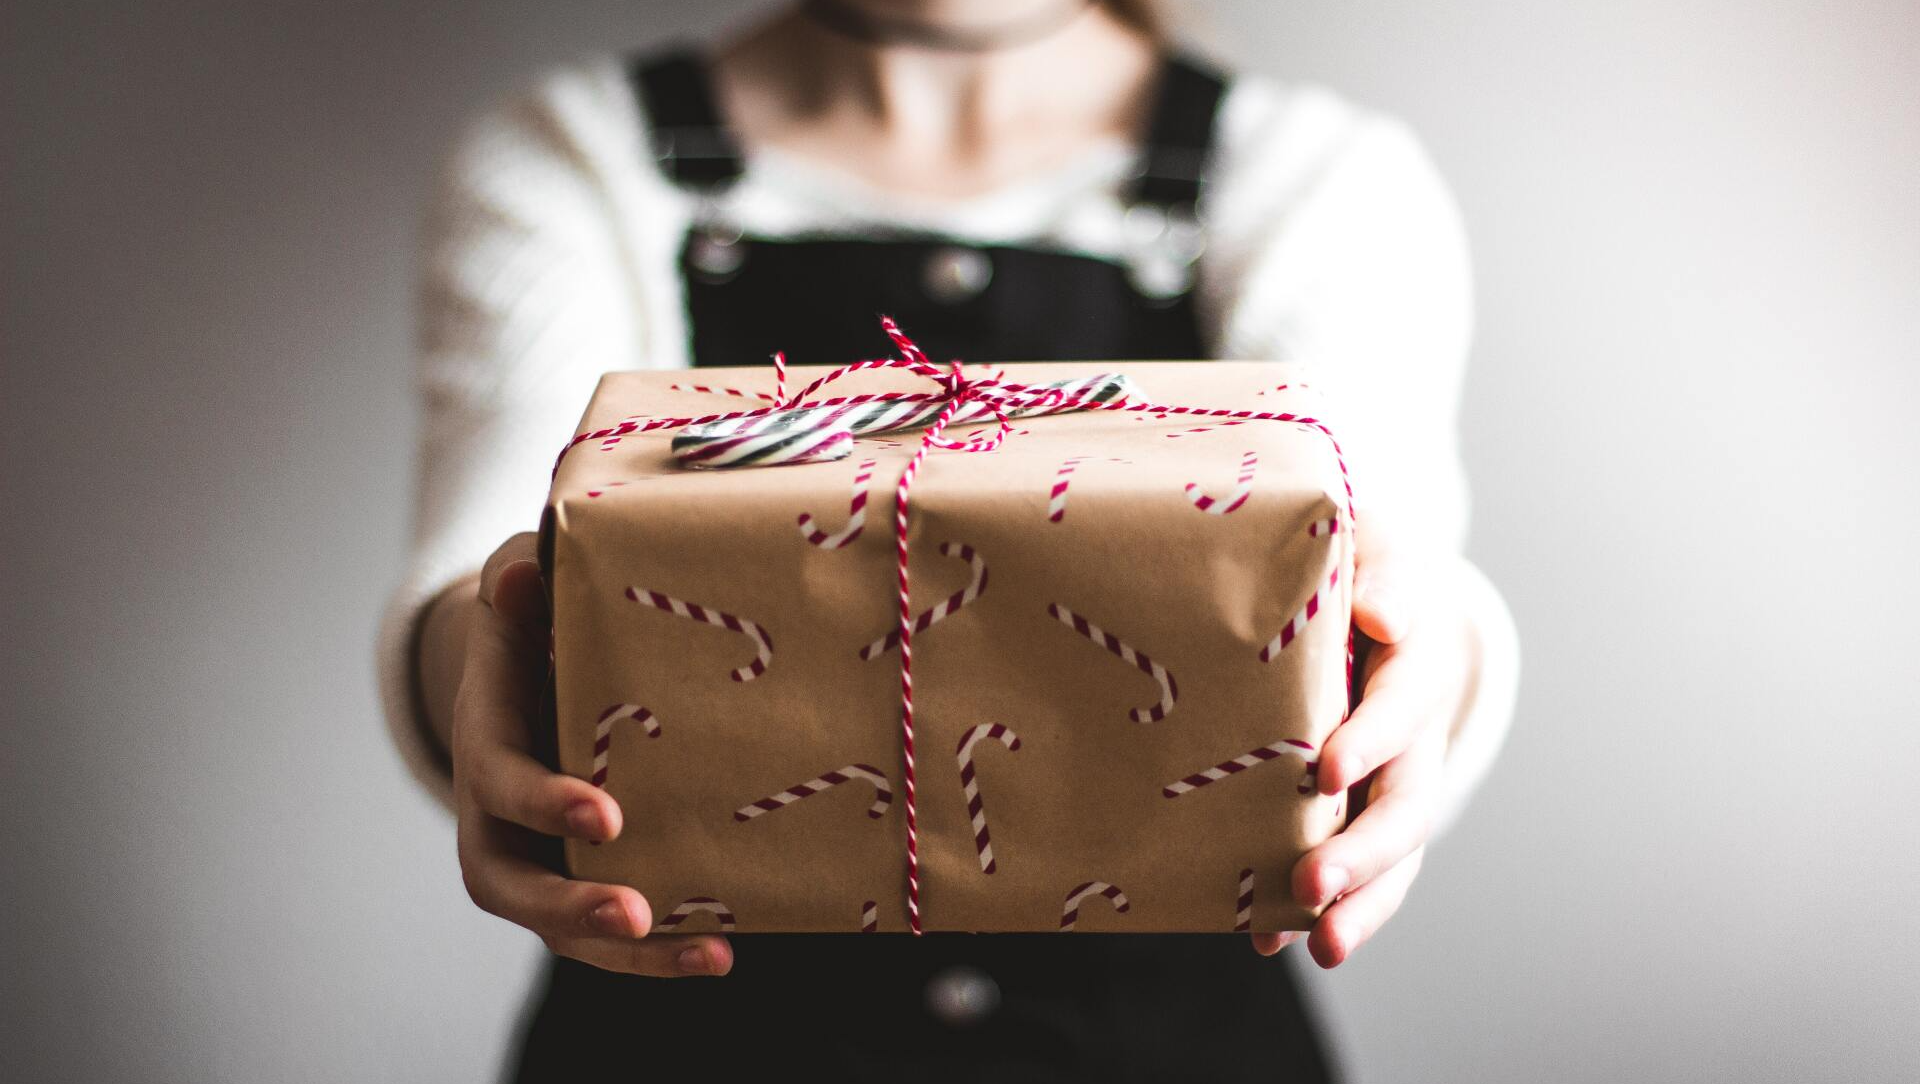 A woman is holding a wrapped gift in her hands.